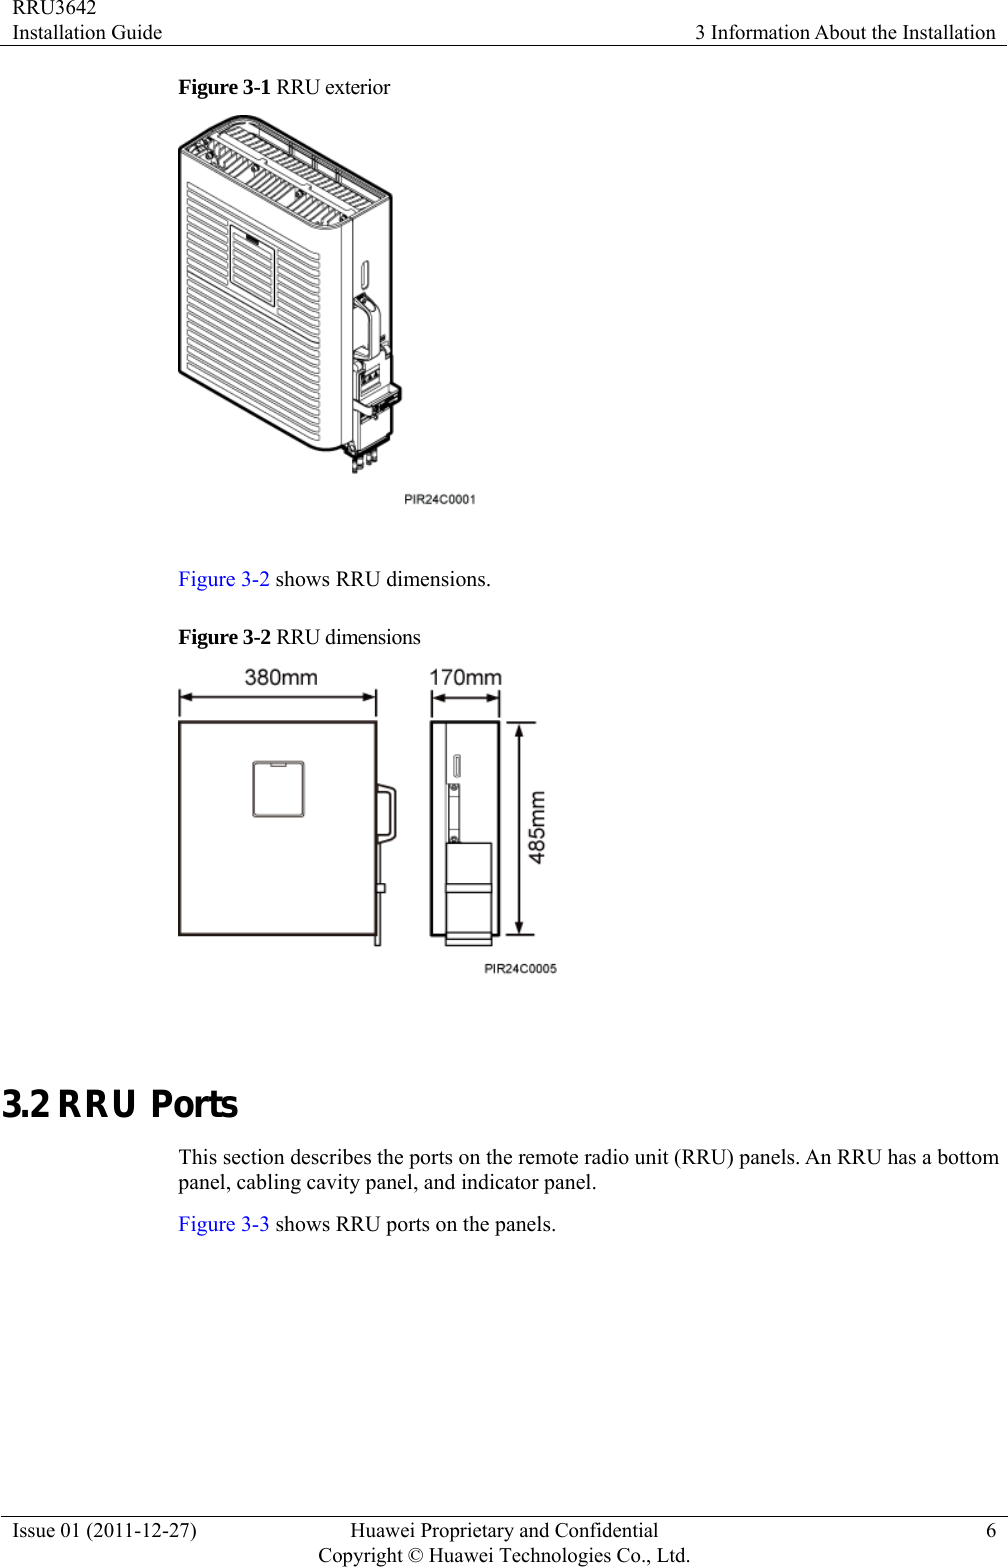 RRU3642 Installation Guide  3 Information About the Installation Issue 01 (2011-12-27)  Huawei Proprietary and Confidential         Copyright © Huawei Technologies Co., Ltd.6 Figure 3-1 RRU exterior   Figure 3-2 shows RRU dimensions. Figure 3-2  RRU  dimensions   3.2 RRU Ports This section describes the ports on the remote radio unit (RRU) panels. An RRU has a bottom panel, cabling cavity panel, and indicator panel. Figure 3-3 shows RRU ports on the panels. 